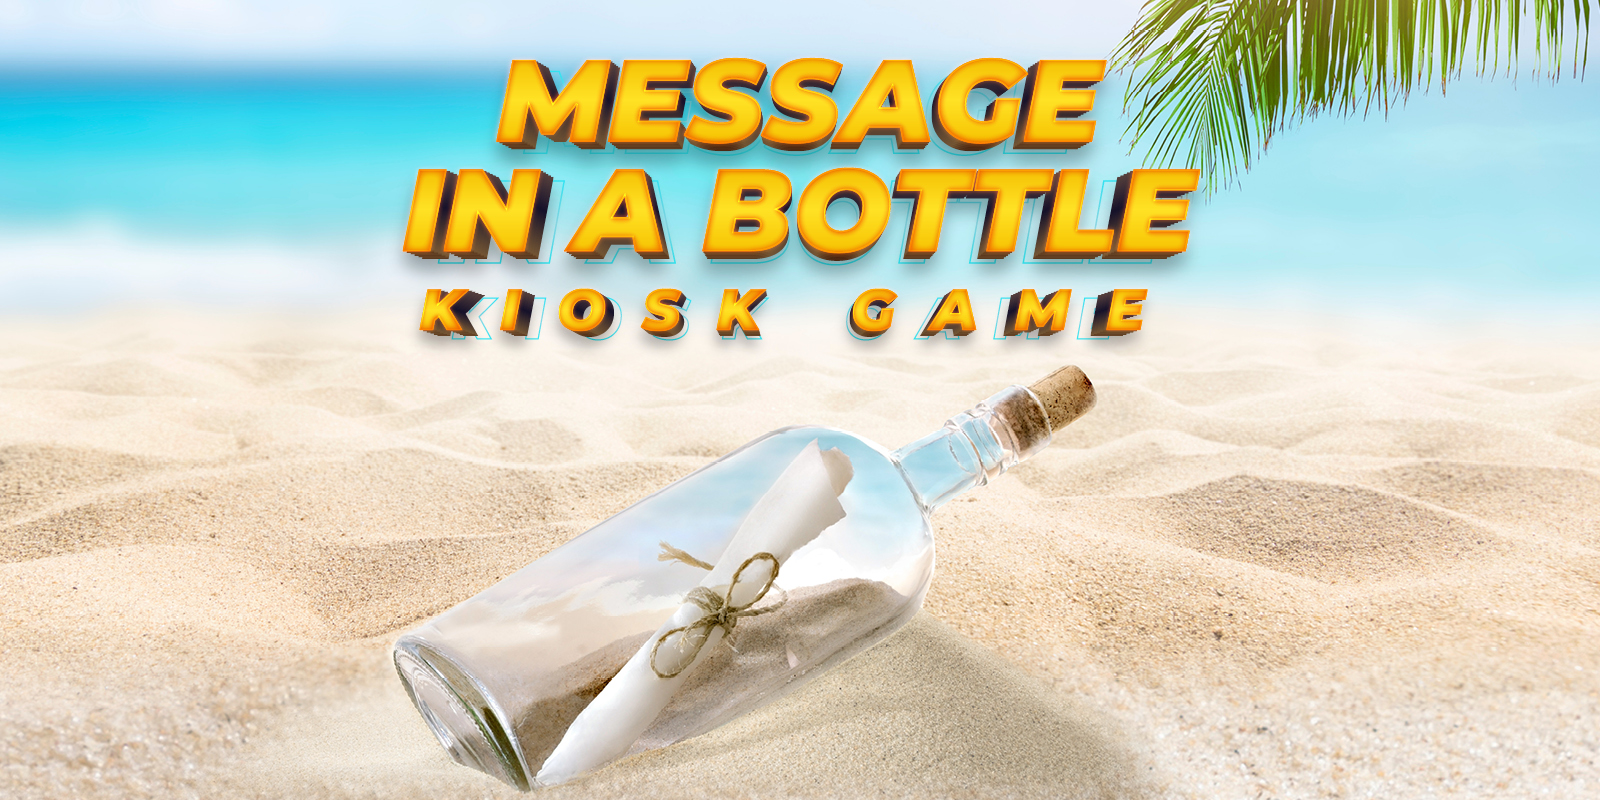 A custom visual to promote the Message In A Bottle Kiosk Game that is happening Mondays - Thursdays in August of 2022. It shows a beach shore with palm trees and a message inside a bottle